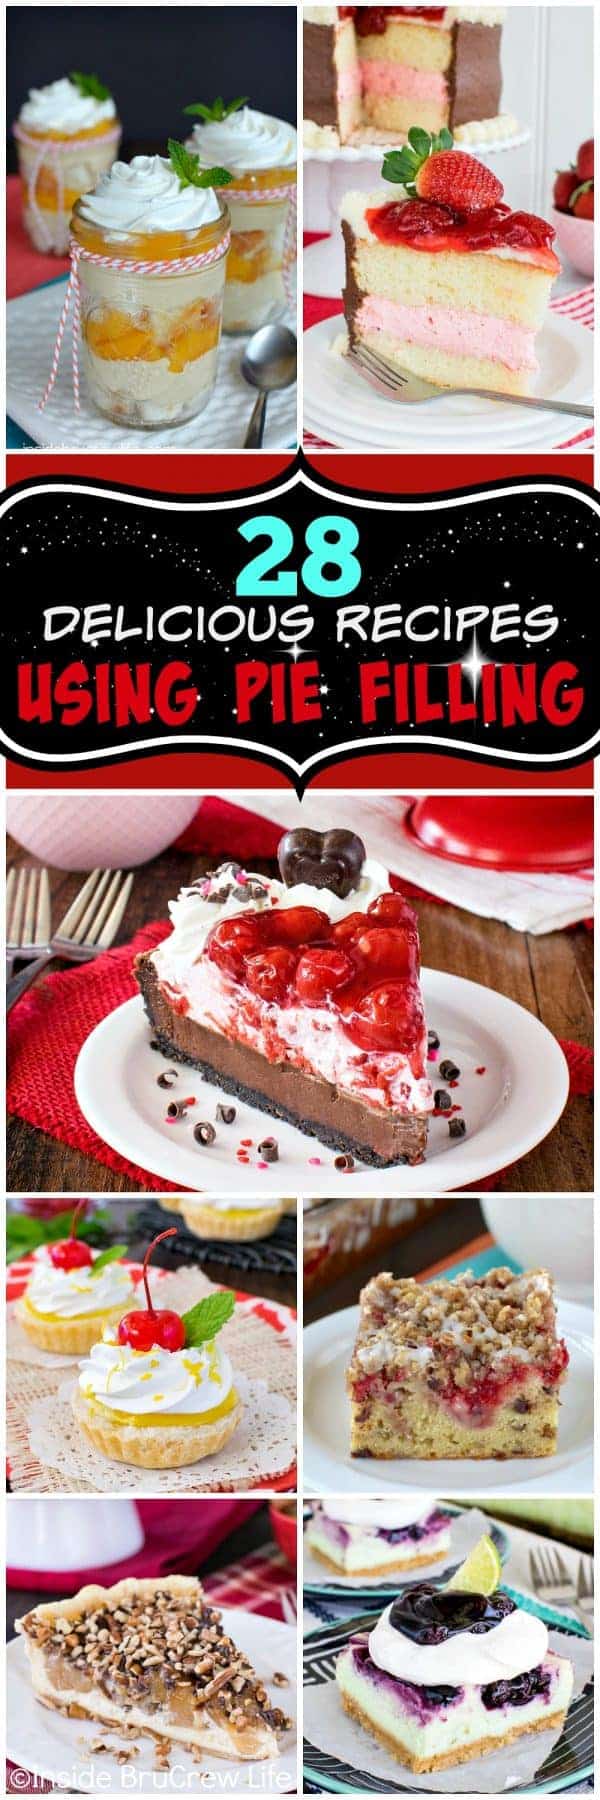 28 Delicious Recipes Using Pie Filling - get ready to bake up a storm this fall using these easy pie filling recipes! Easy desserts for any dinner or party!